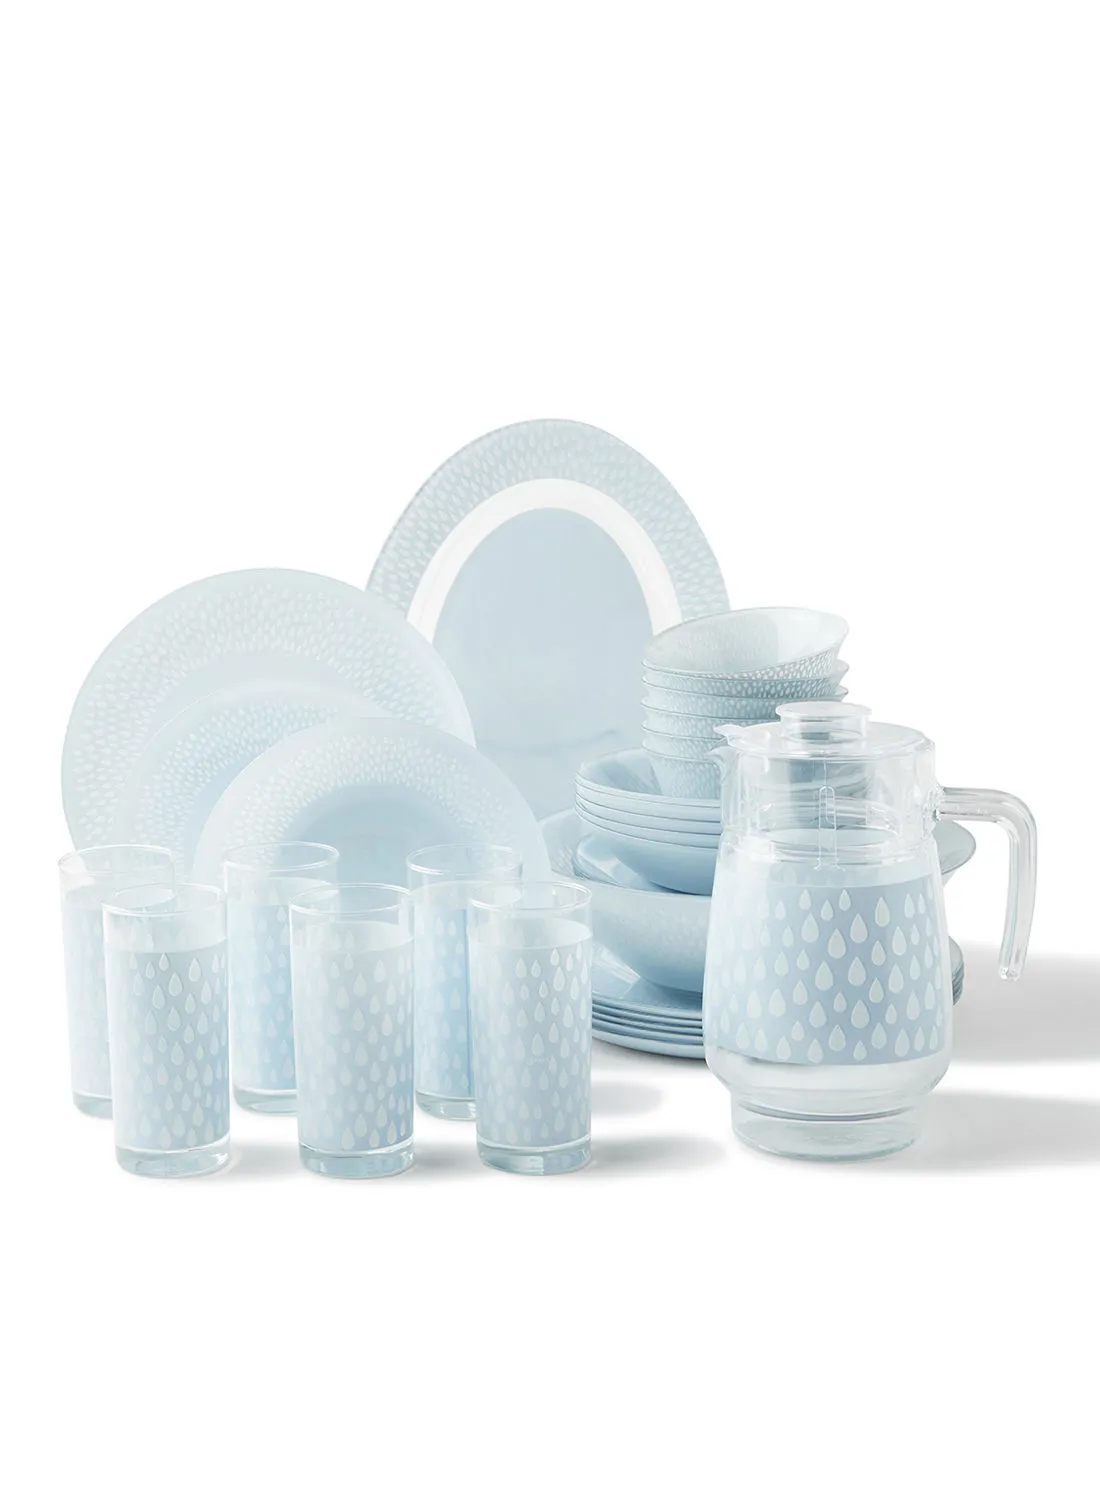 noon east 34 Piece Glass Dinner Set For Everyday Use - Light Weight Dishes, Plates - Dinner Plate, Side Plate, Bowl - Serves 6 - Printed Design Alice Blue